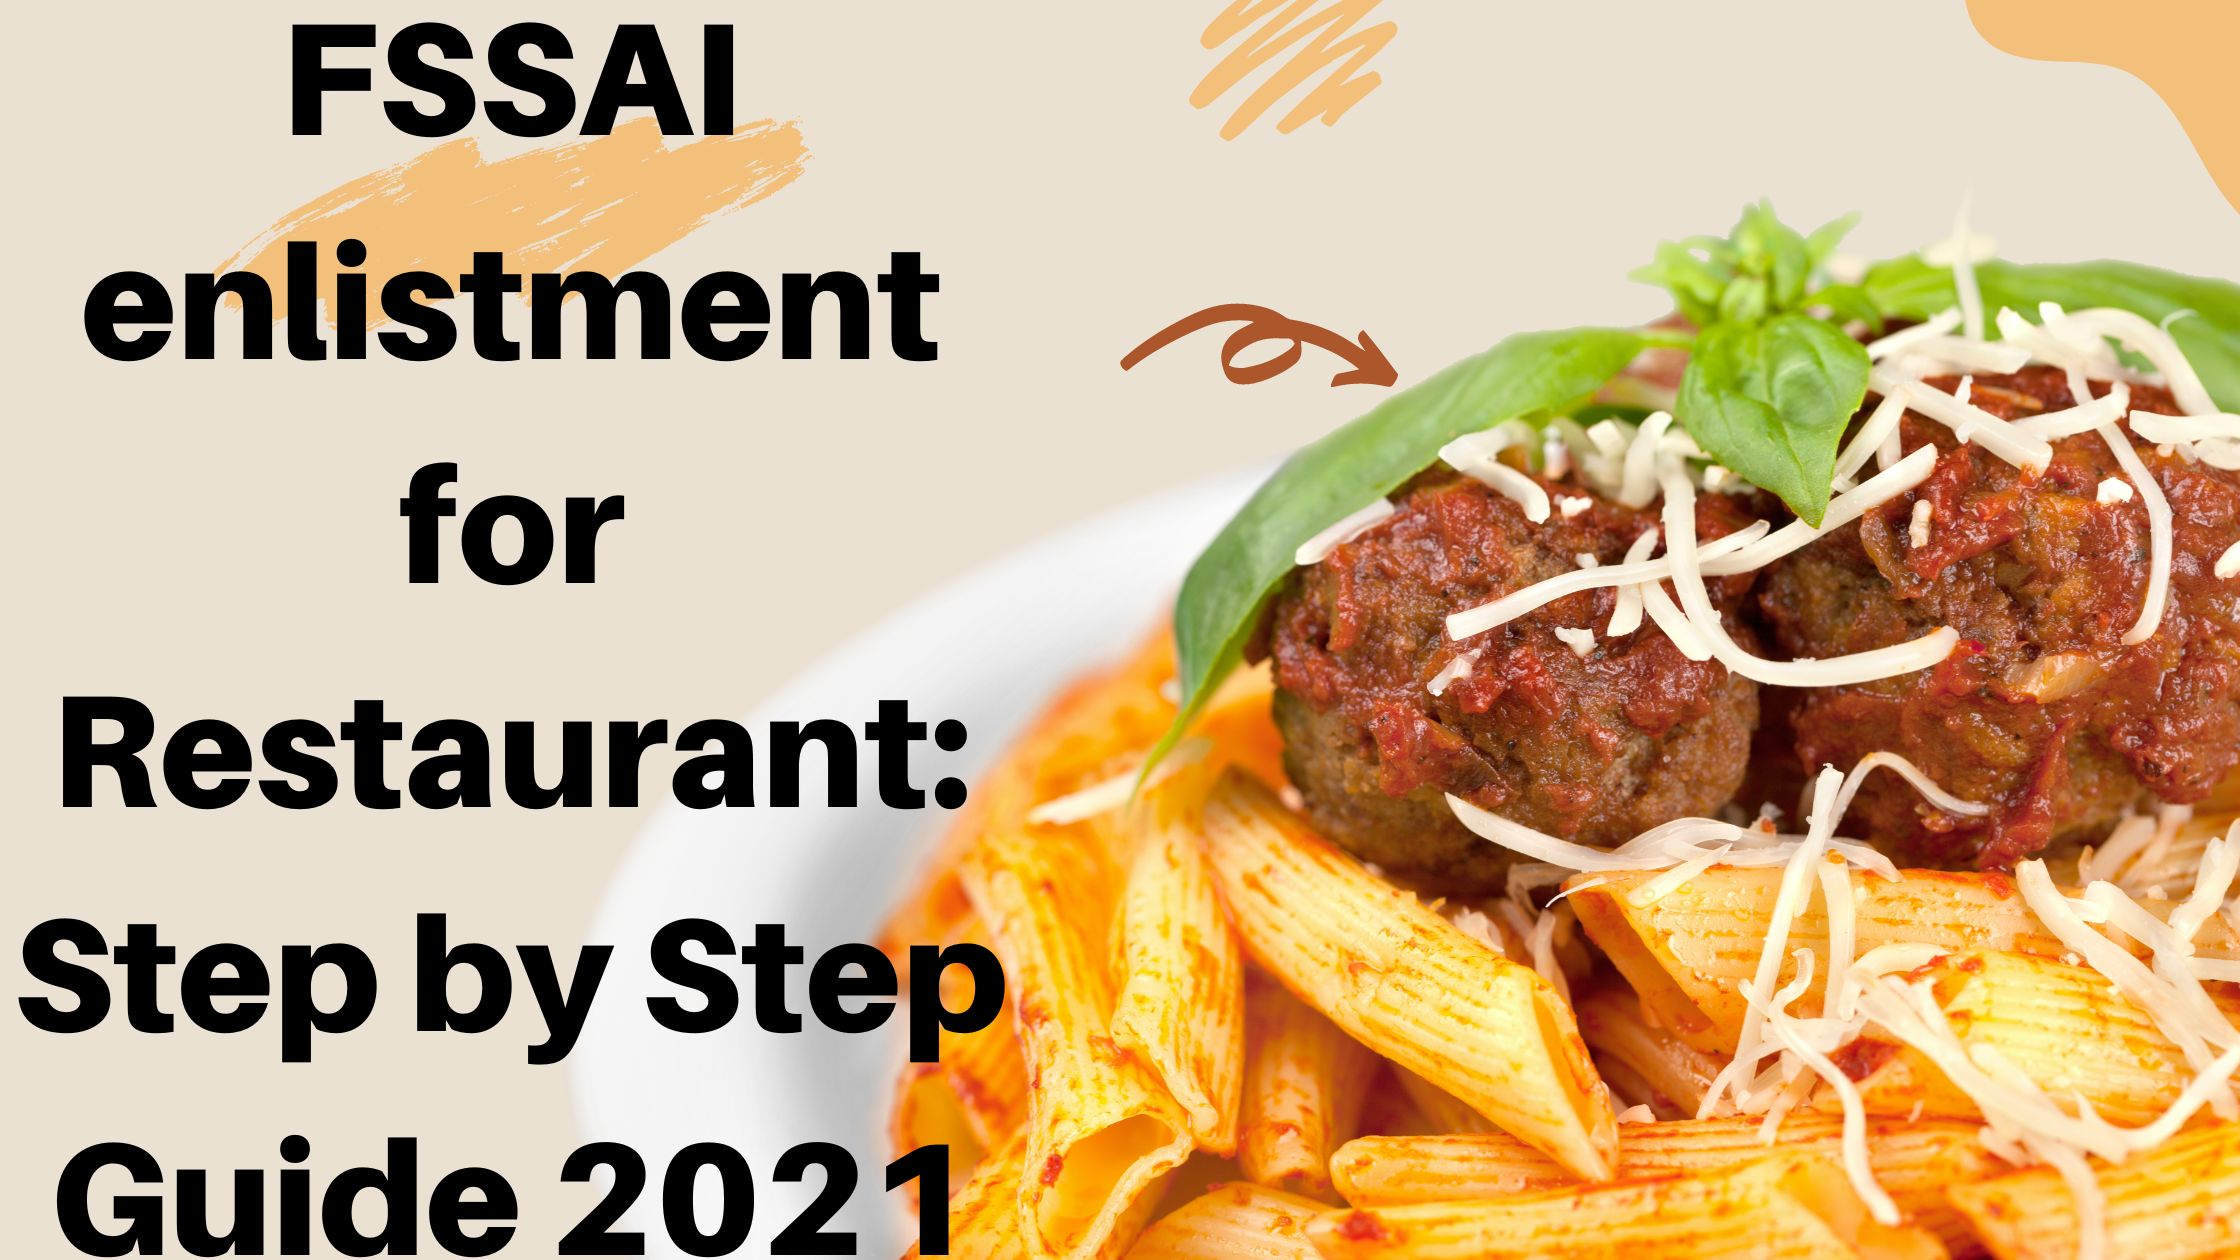 FSSAI enlistment for Restaurant: Step by Step Guide 2021￼